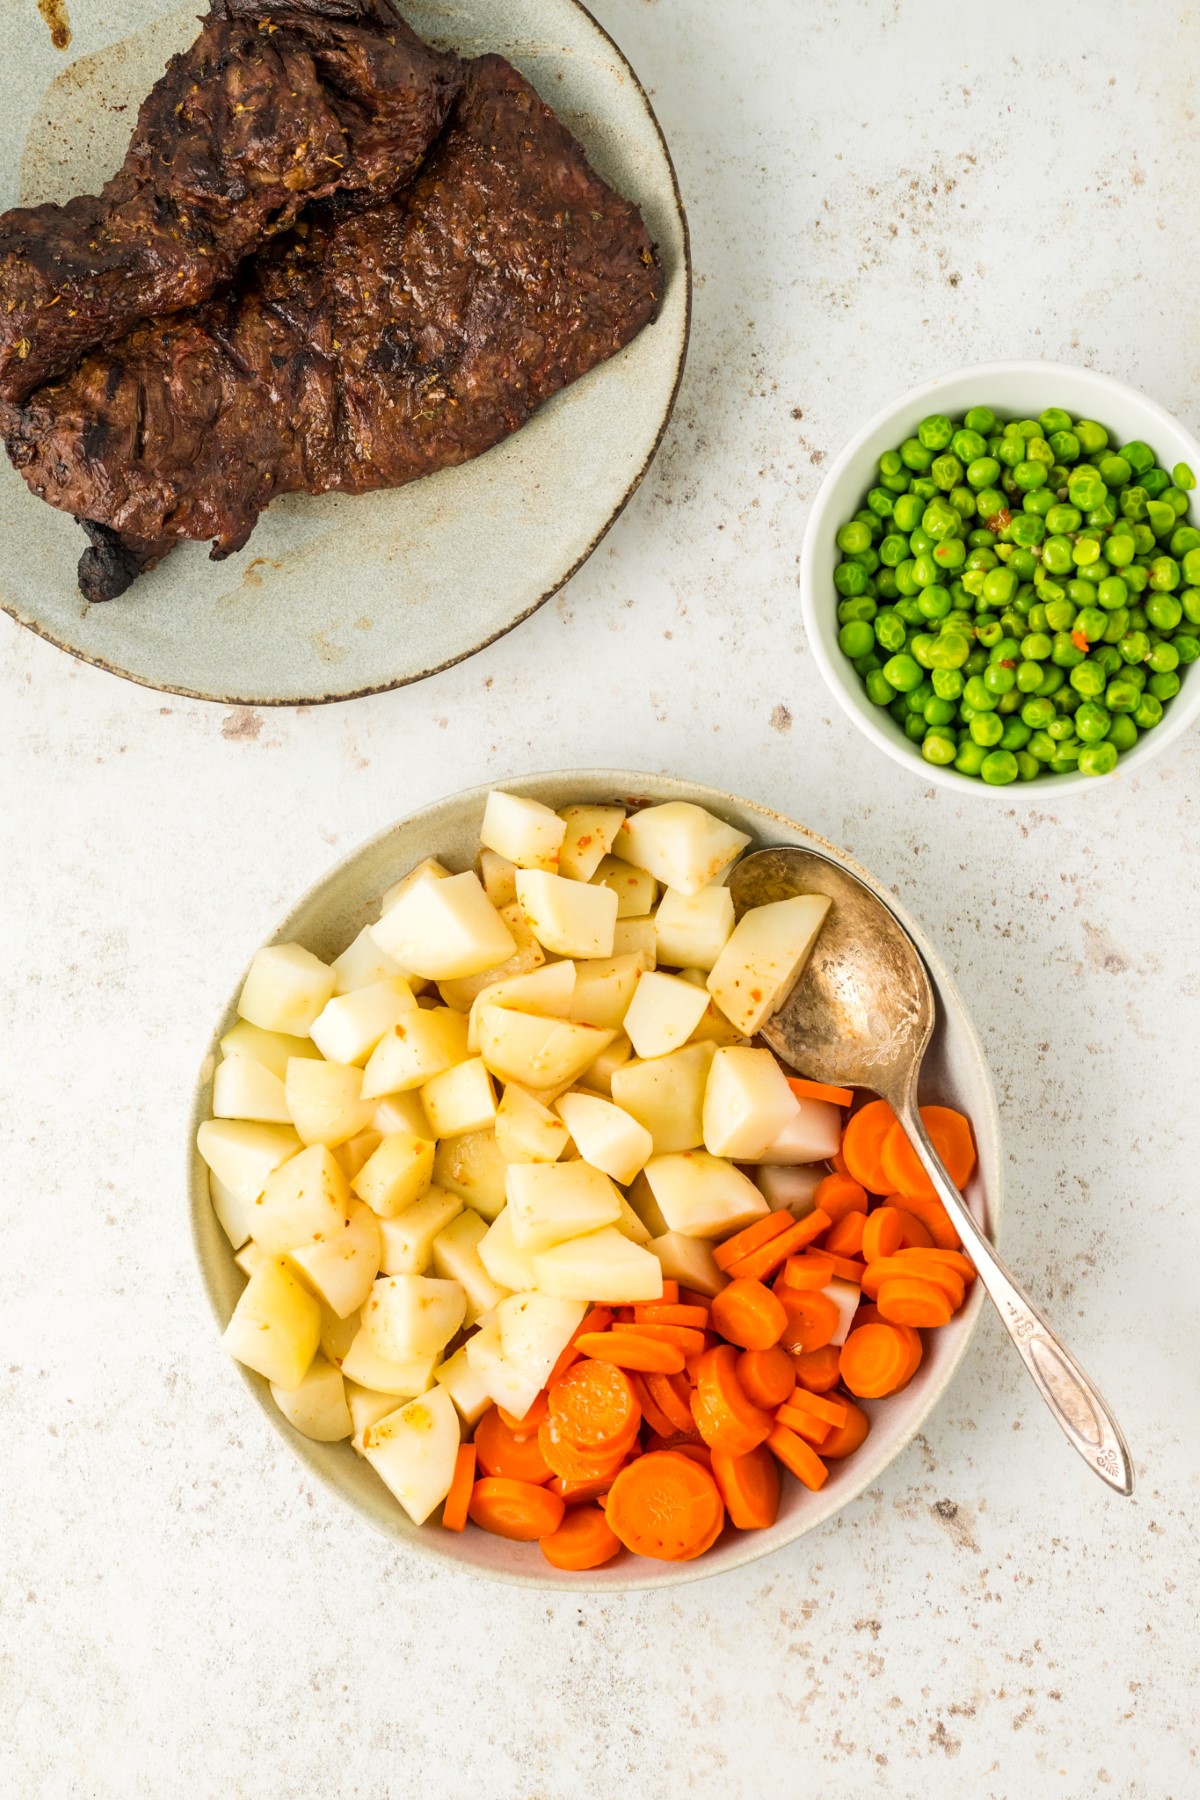 Grilled flank streak, cooked peas, carrots, and potatoes in separate bowls.